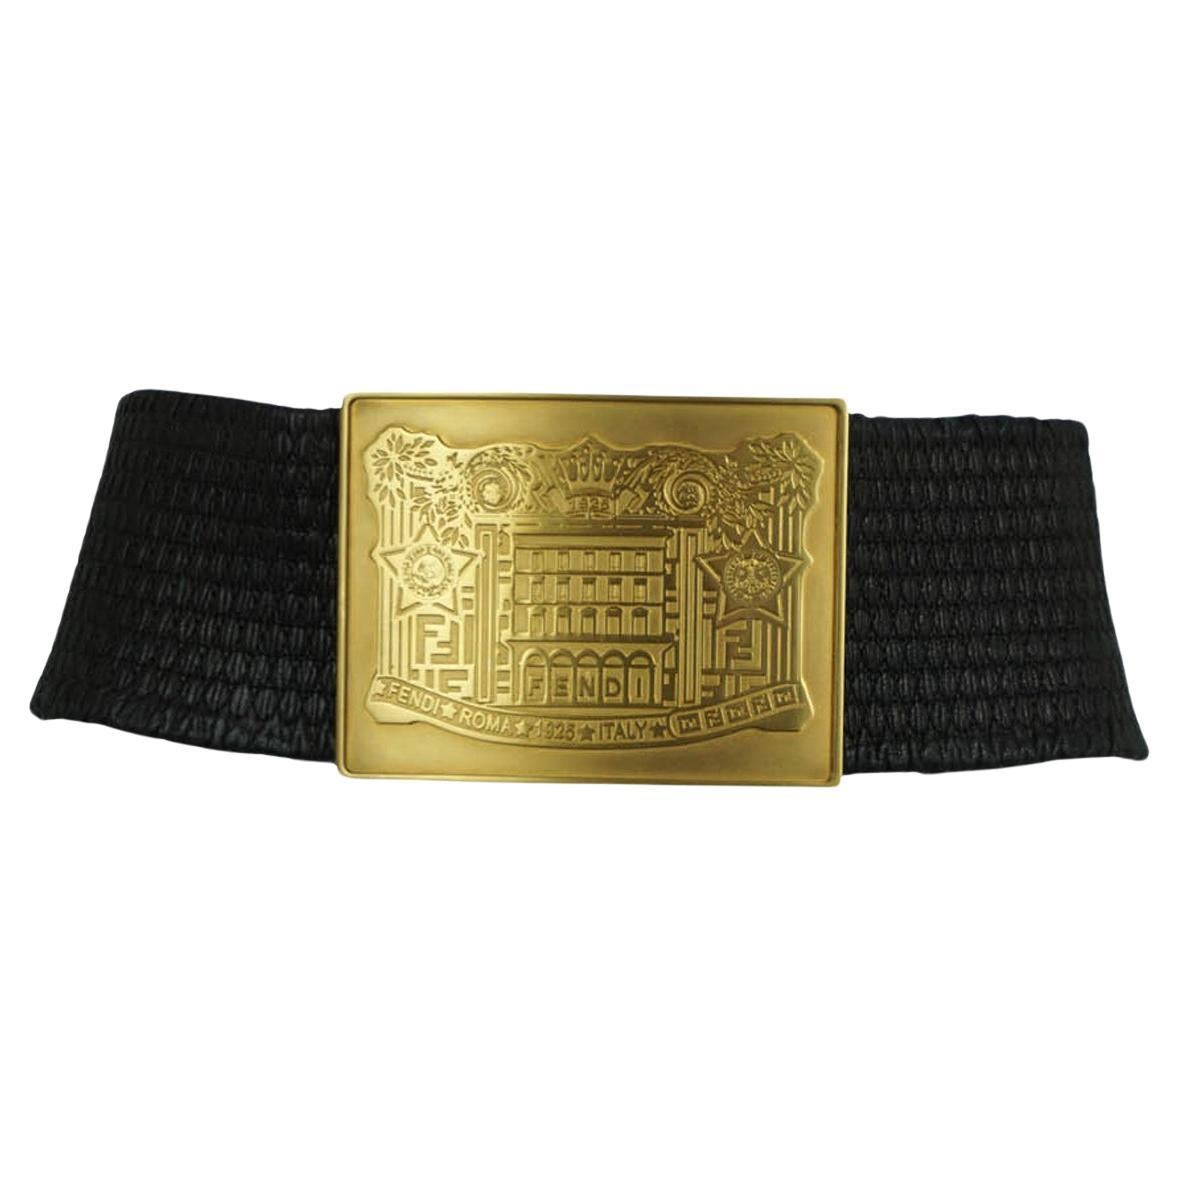 Are Fendi belts made in italy?